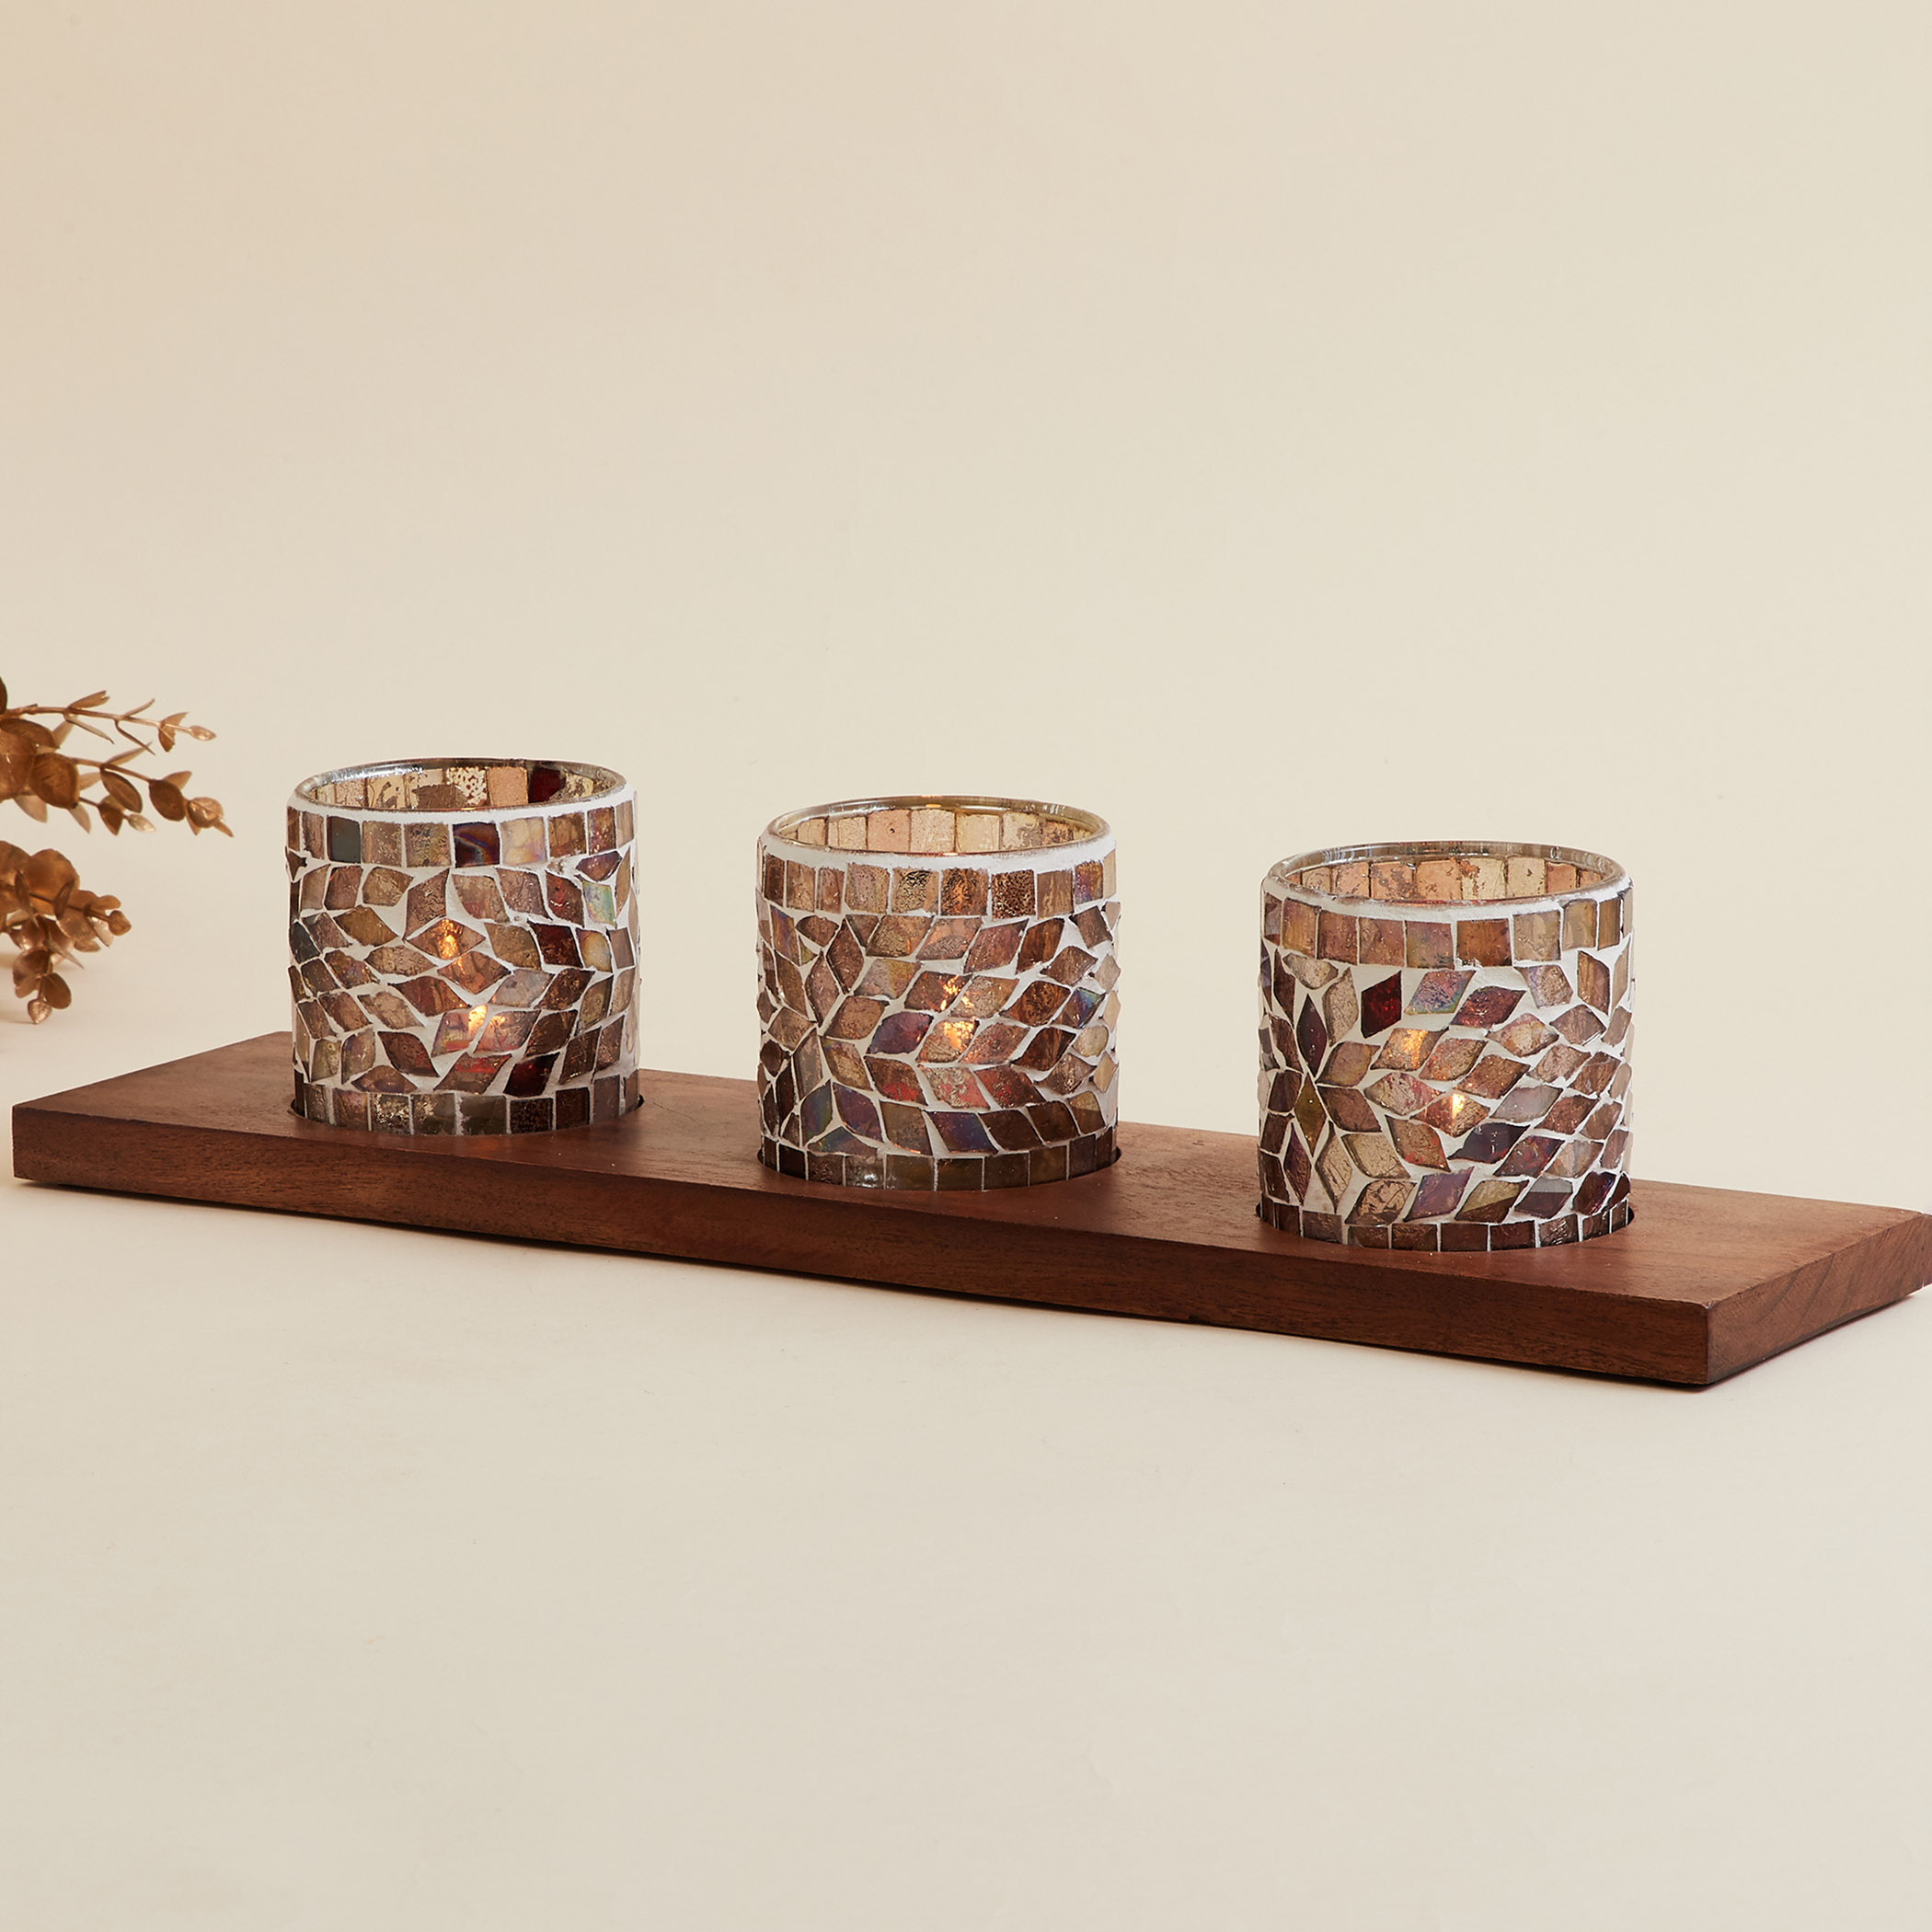 Mystique Set of 3 Glass Mosaic T-Light Holders with Stand